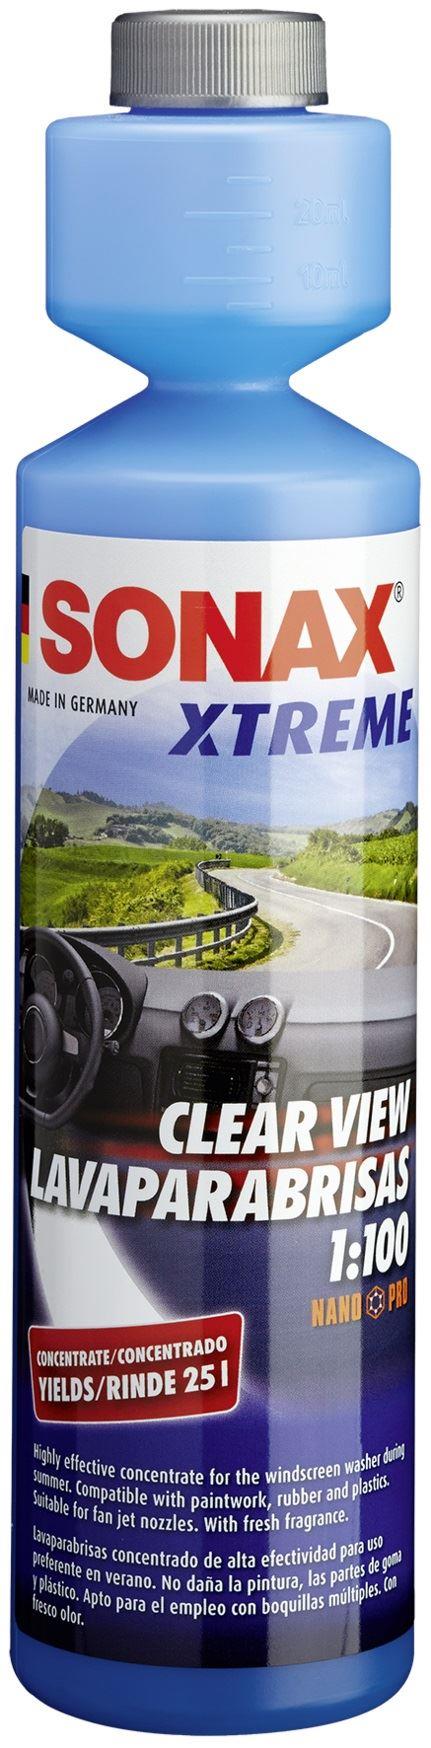 Sonax XTREME Clear View 1:100 Concentrate Nanopro 250 ml